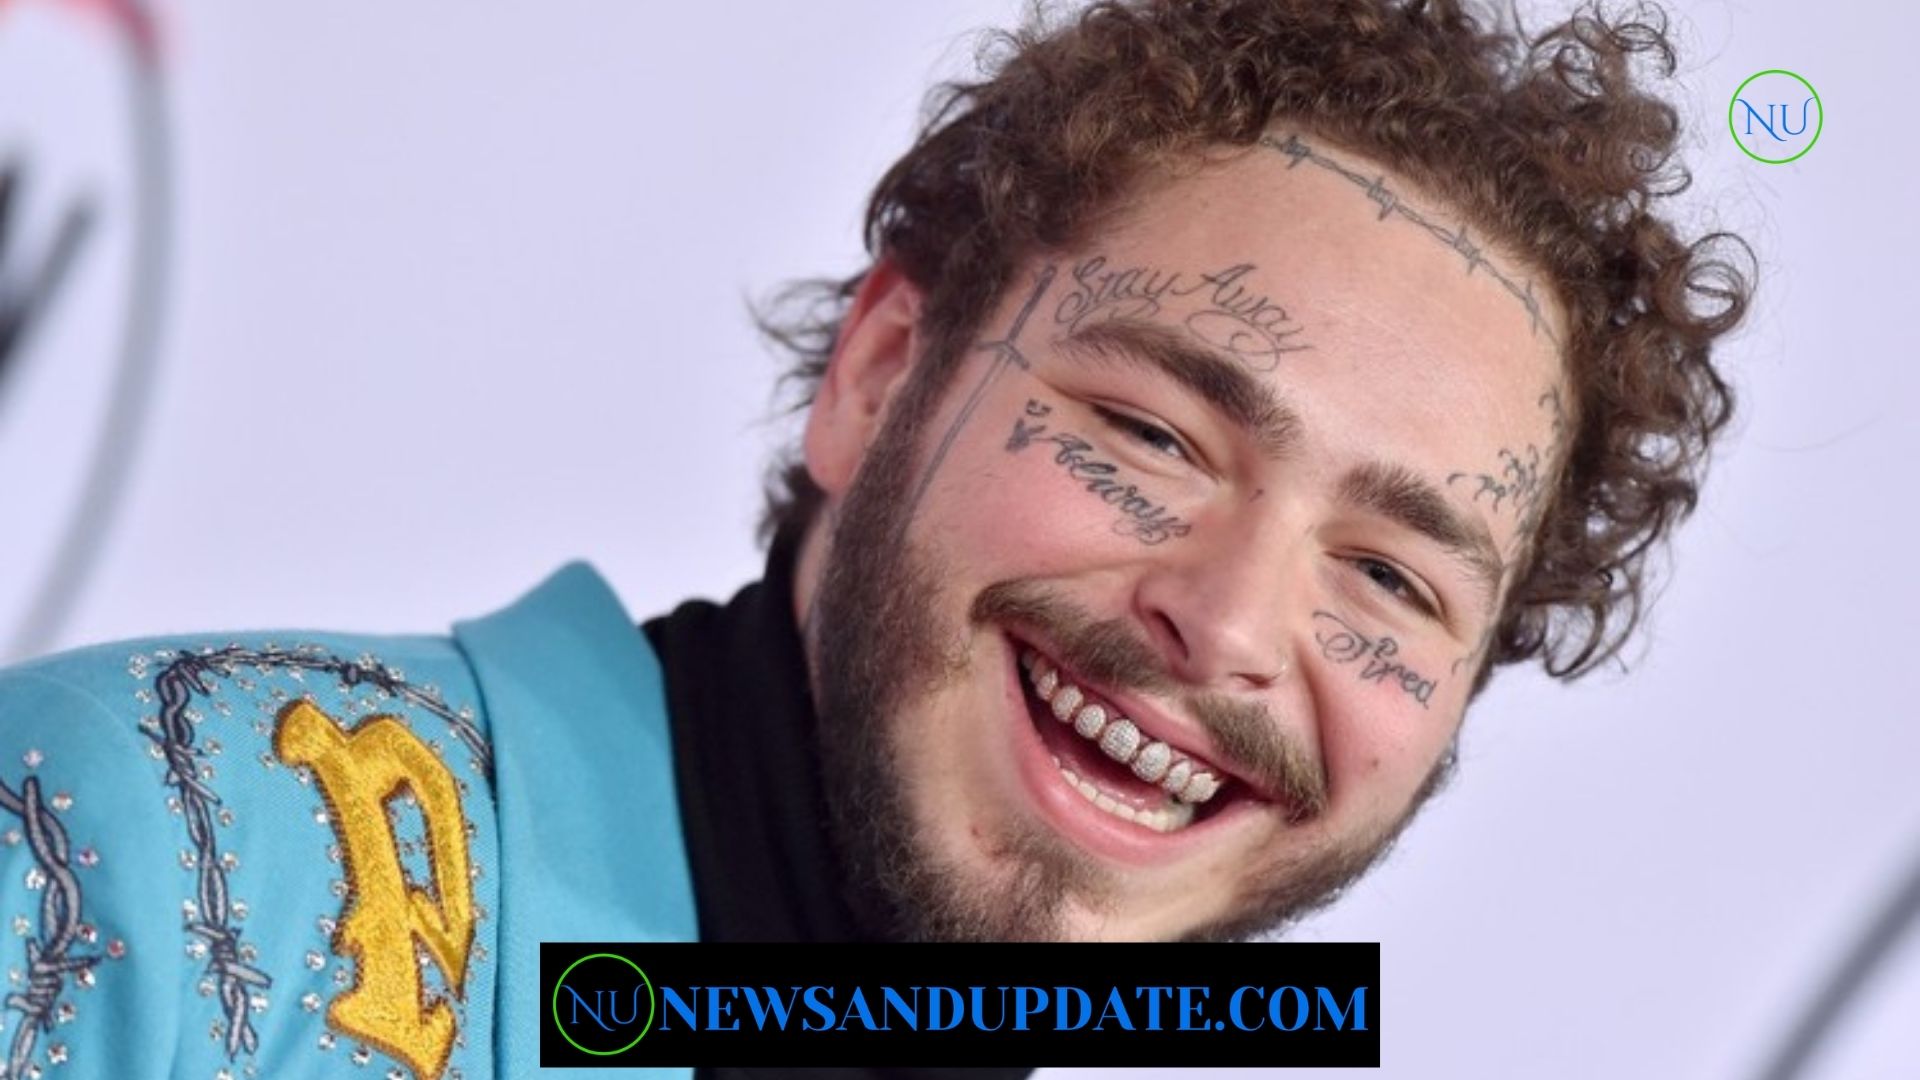 Post Malone Welcomes First Child With Fiancee, Confirms Engagement